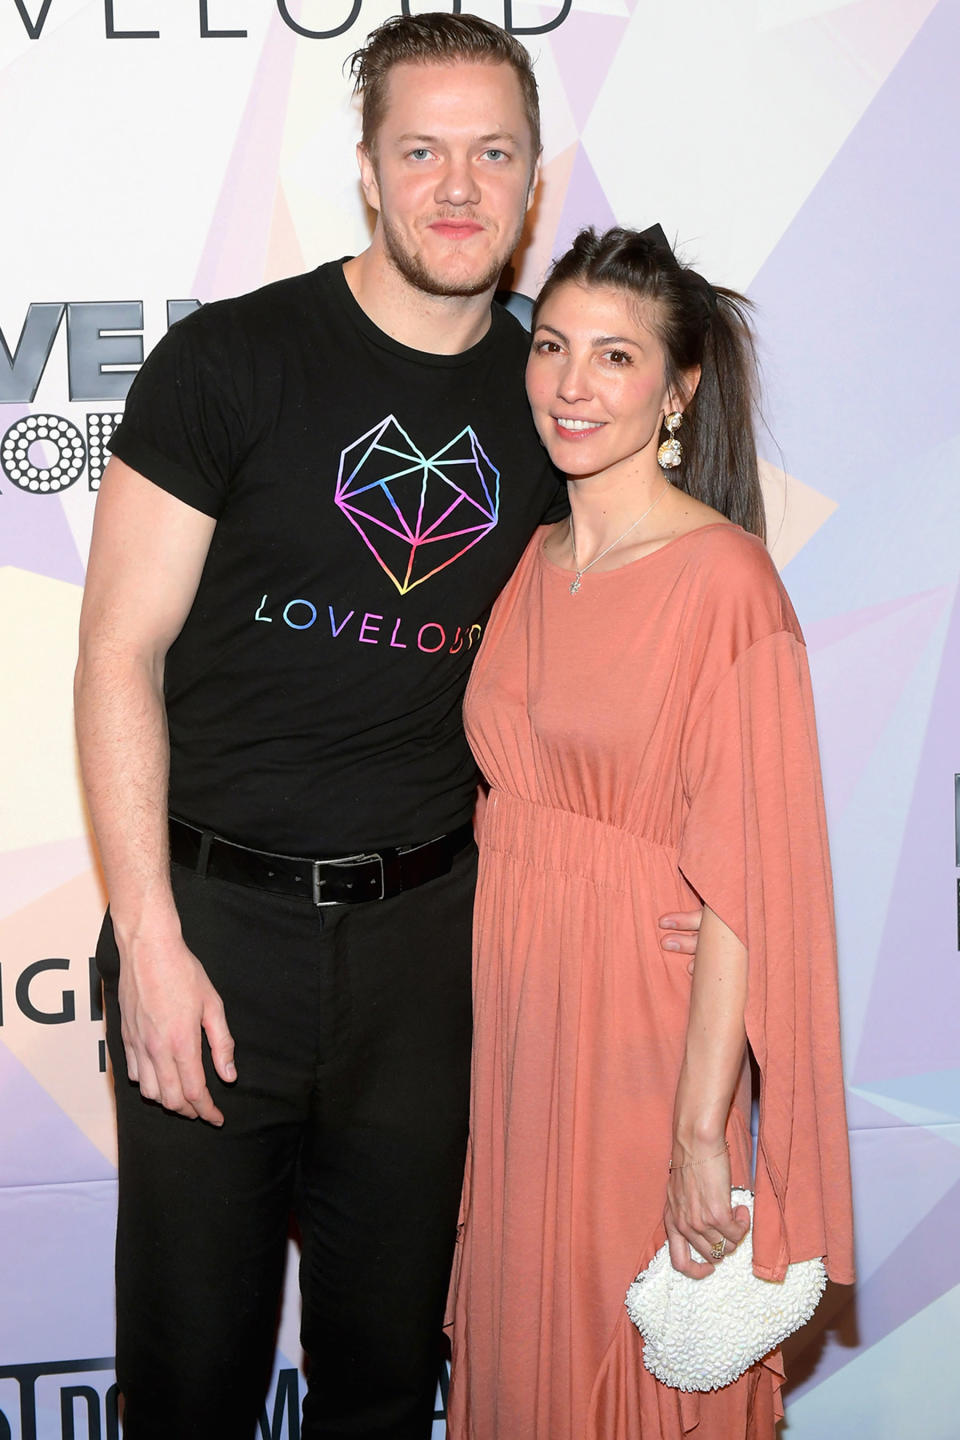 Dan Reynold's and Wife Aja Volkman Have Reconciled